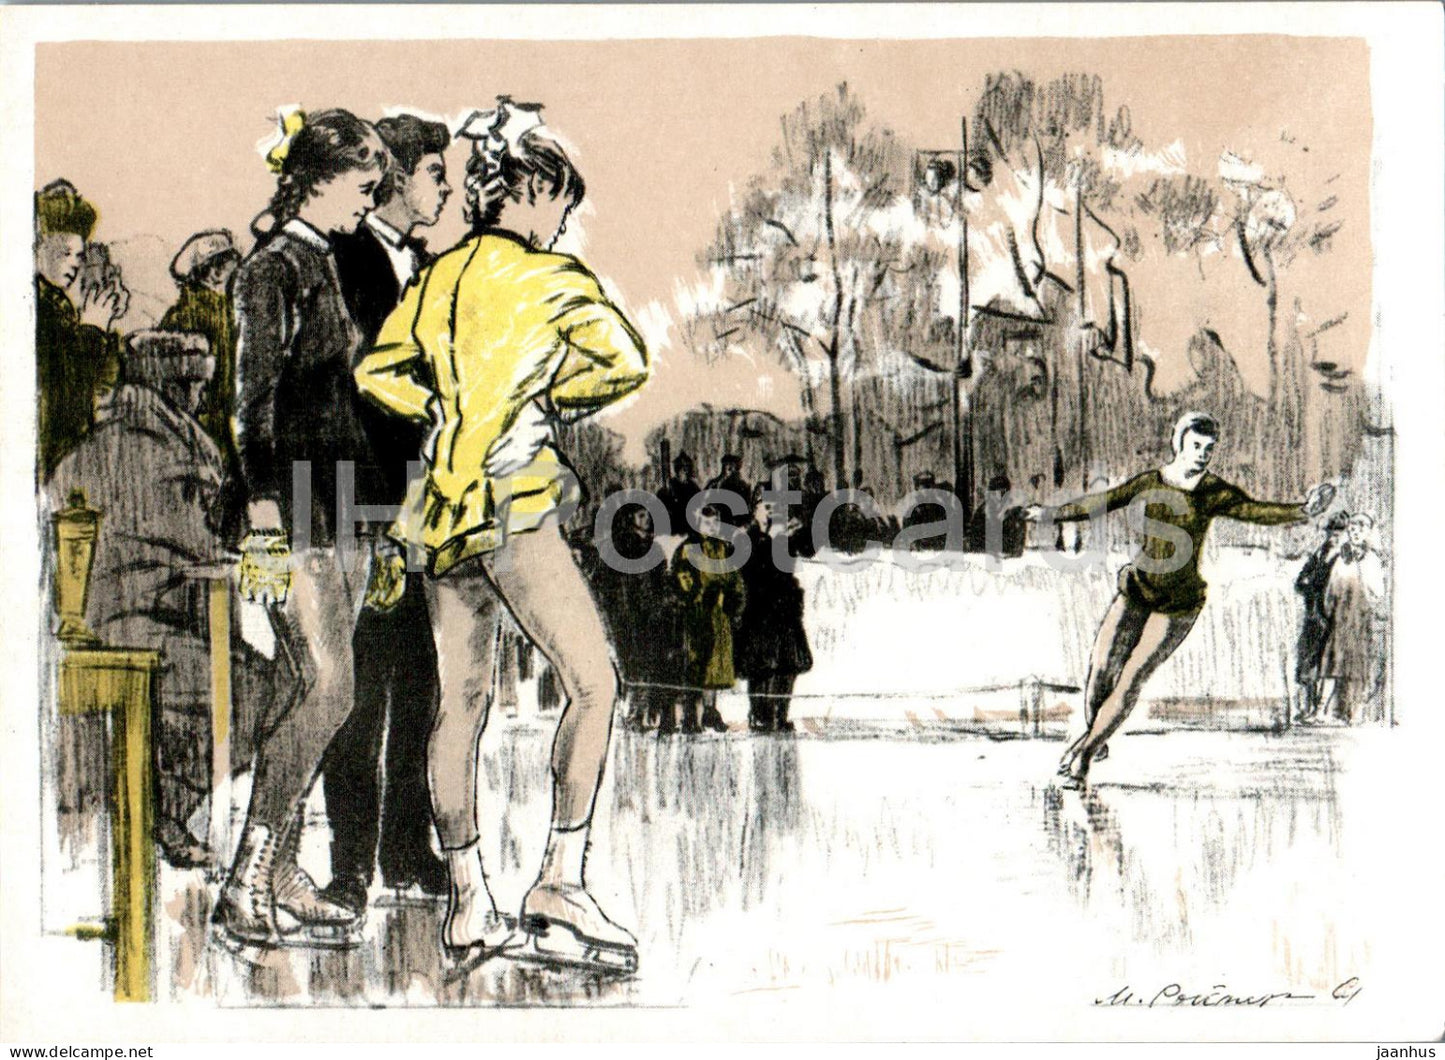 painting by M. Royter - Figure skating - sport - Russian art - 1963 - Russia USSR - unused - JH Postcards